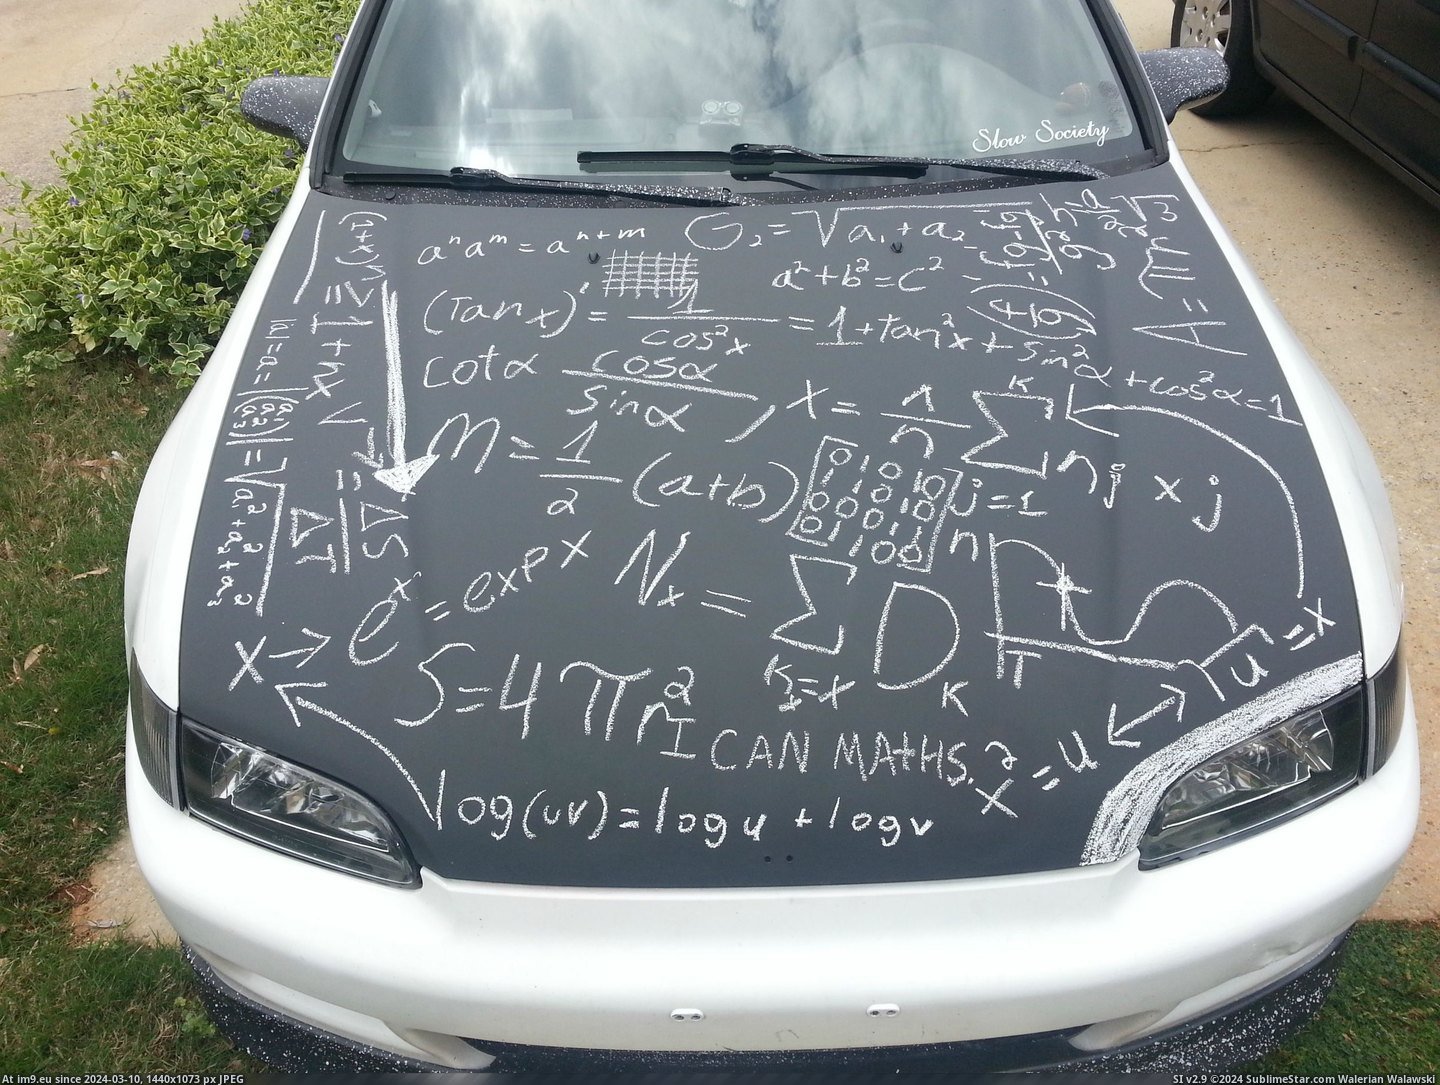 #Part #For #Love #Edition #Hood #Minute #Deux #Repairs #Paint #Chalkboard #Painted #Drawing [Pics] I painted my hood in chalkboard paint and love every minute drawing on it! Part Deux, in for repairs edition. 11 Pic. (Bild von album My r/PICS favs))